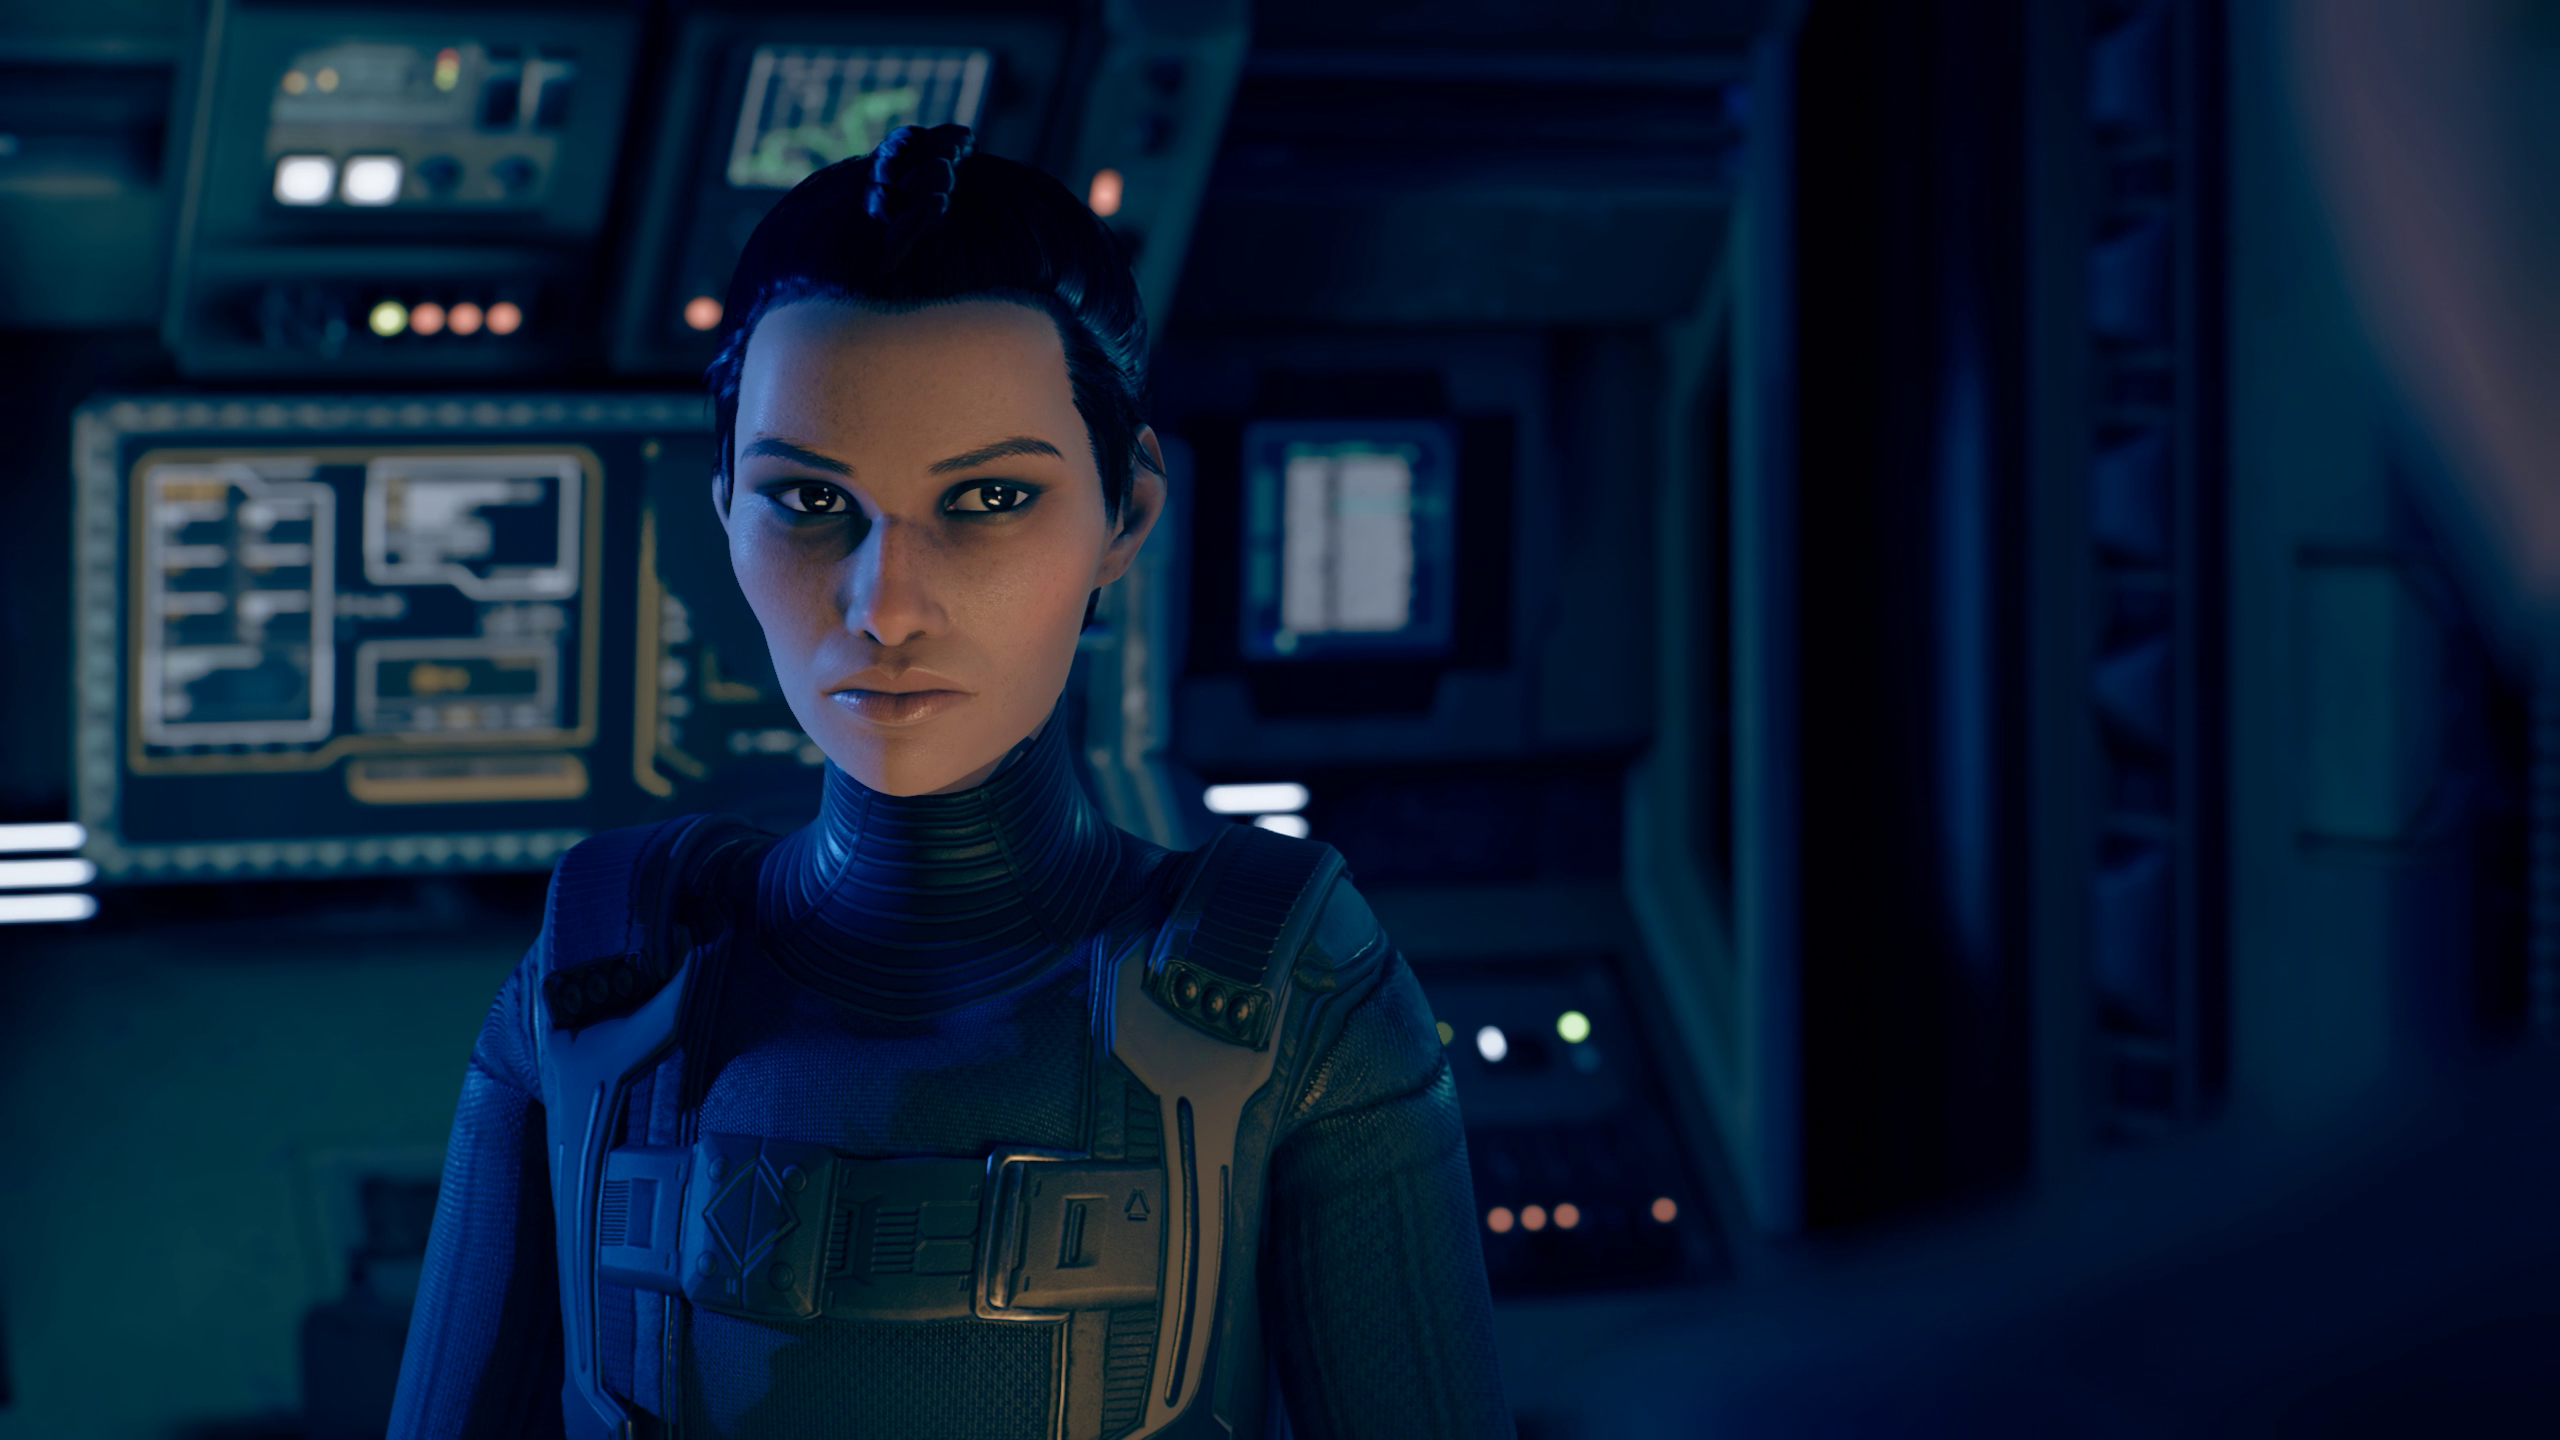 The Expanse: A Telltale Series - First Gameplay Trailer 